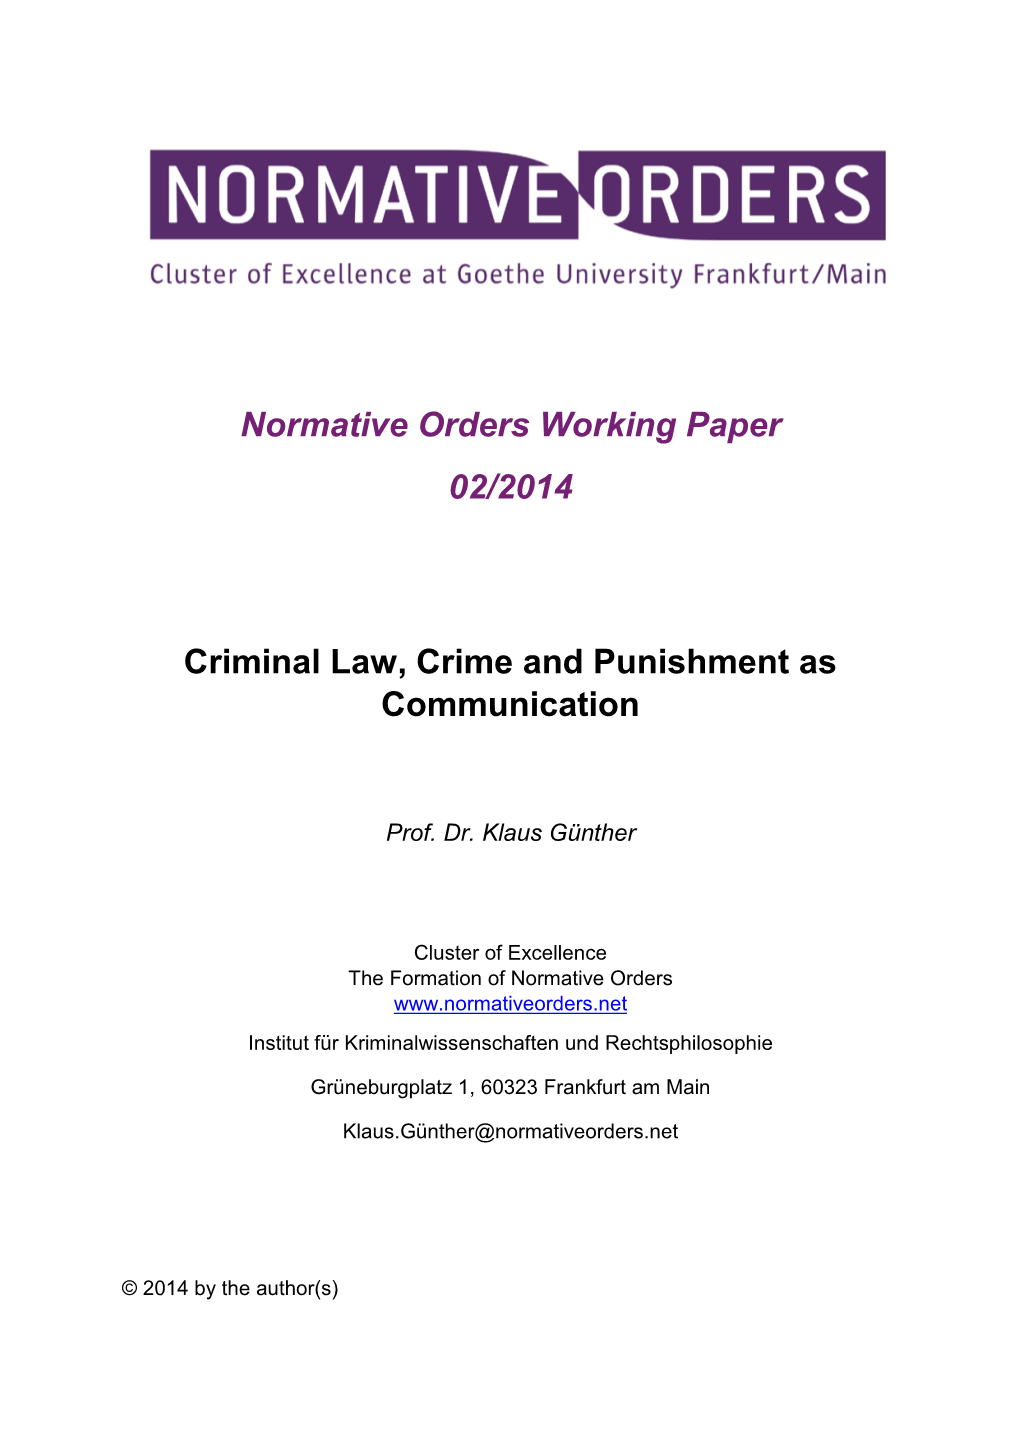 Criminal Law, Crime and Punishment As Communication